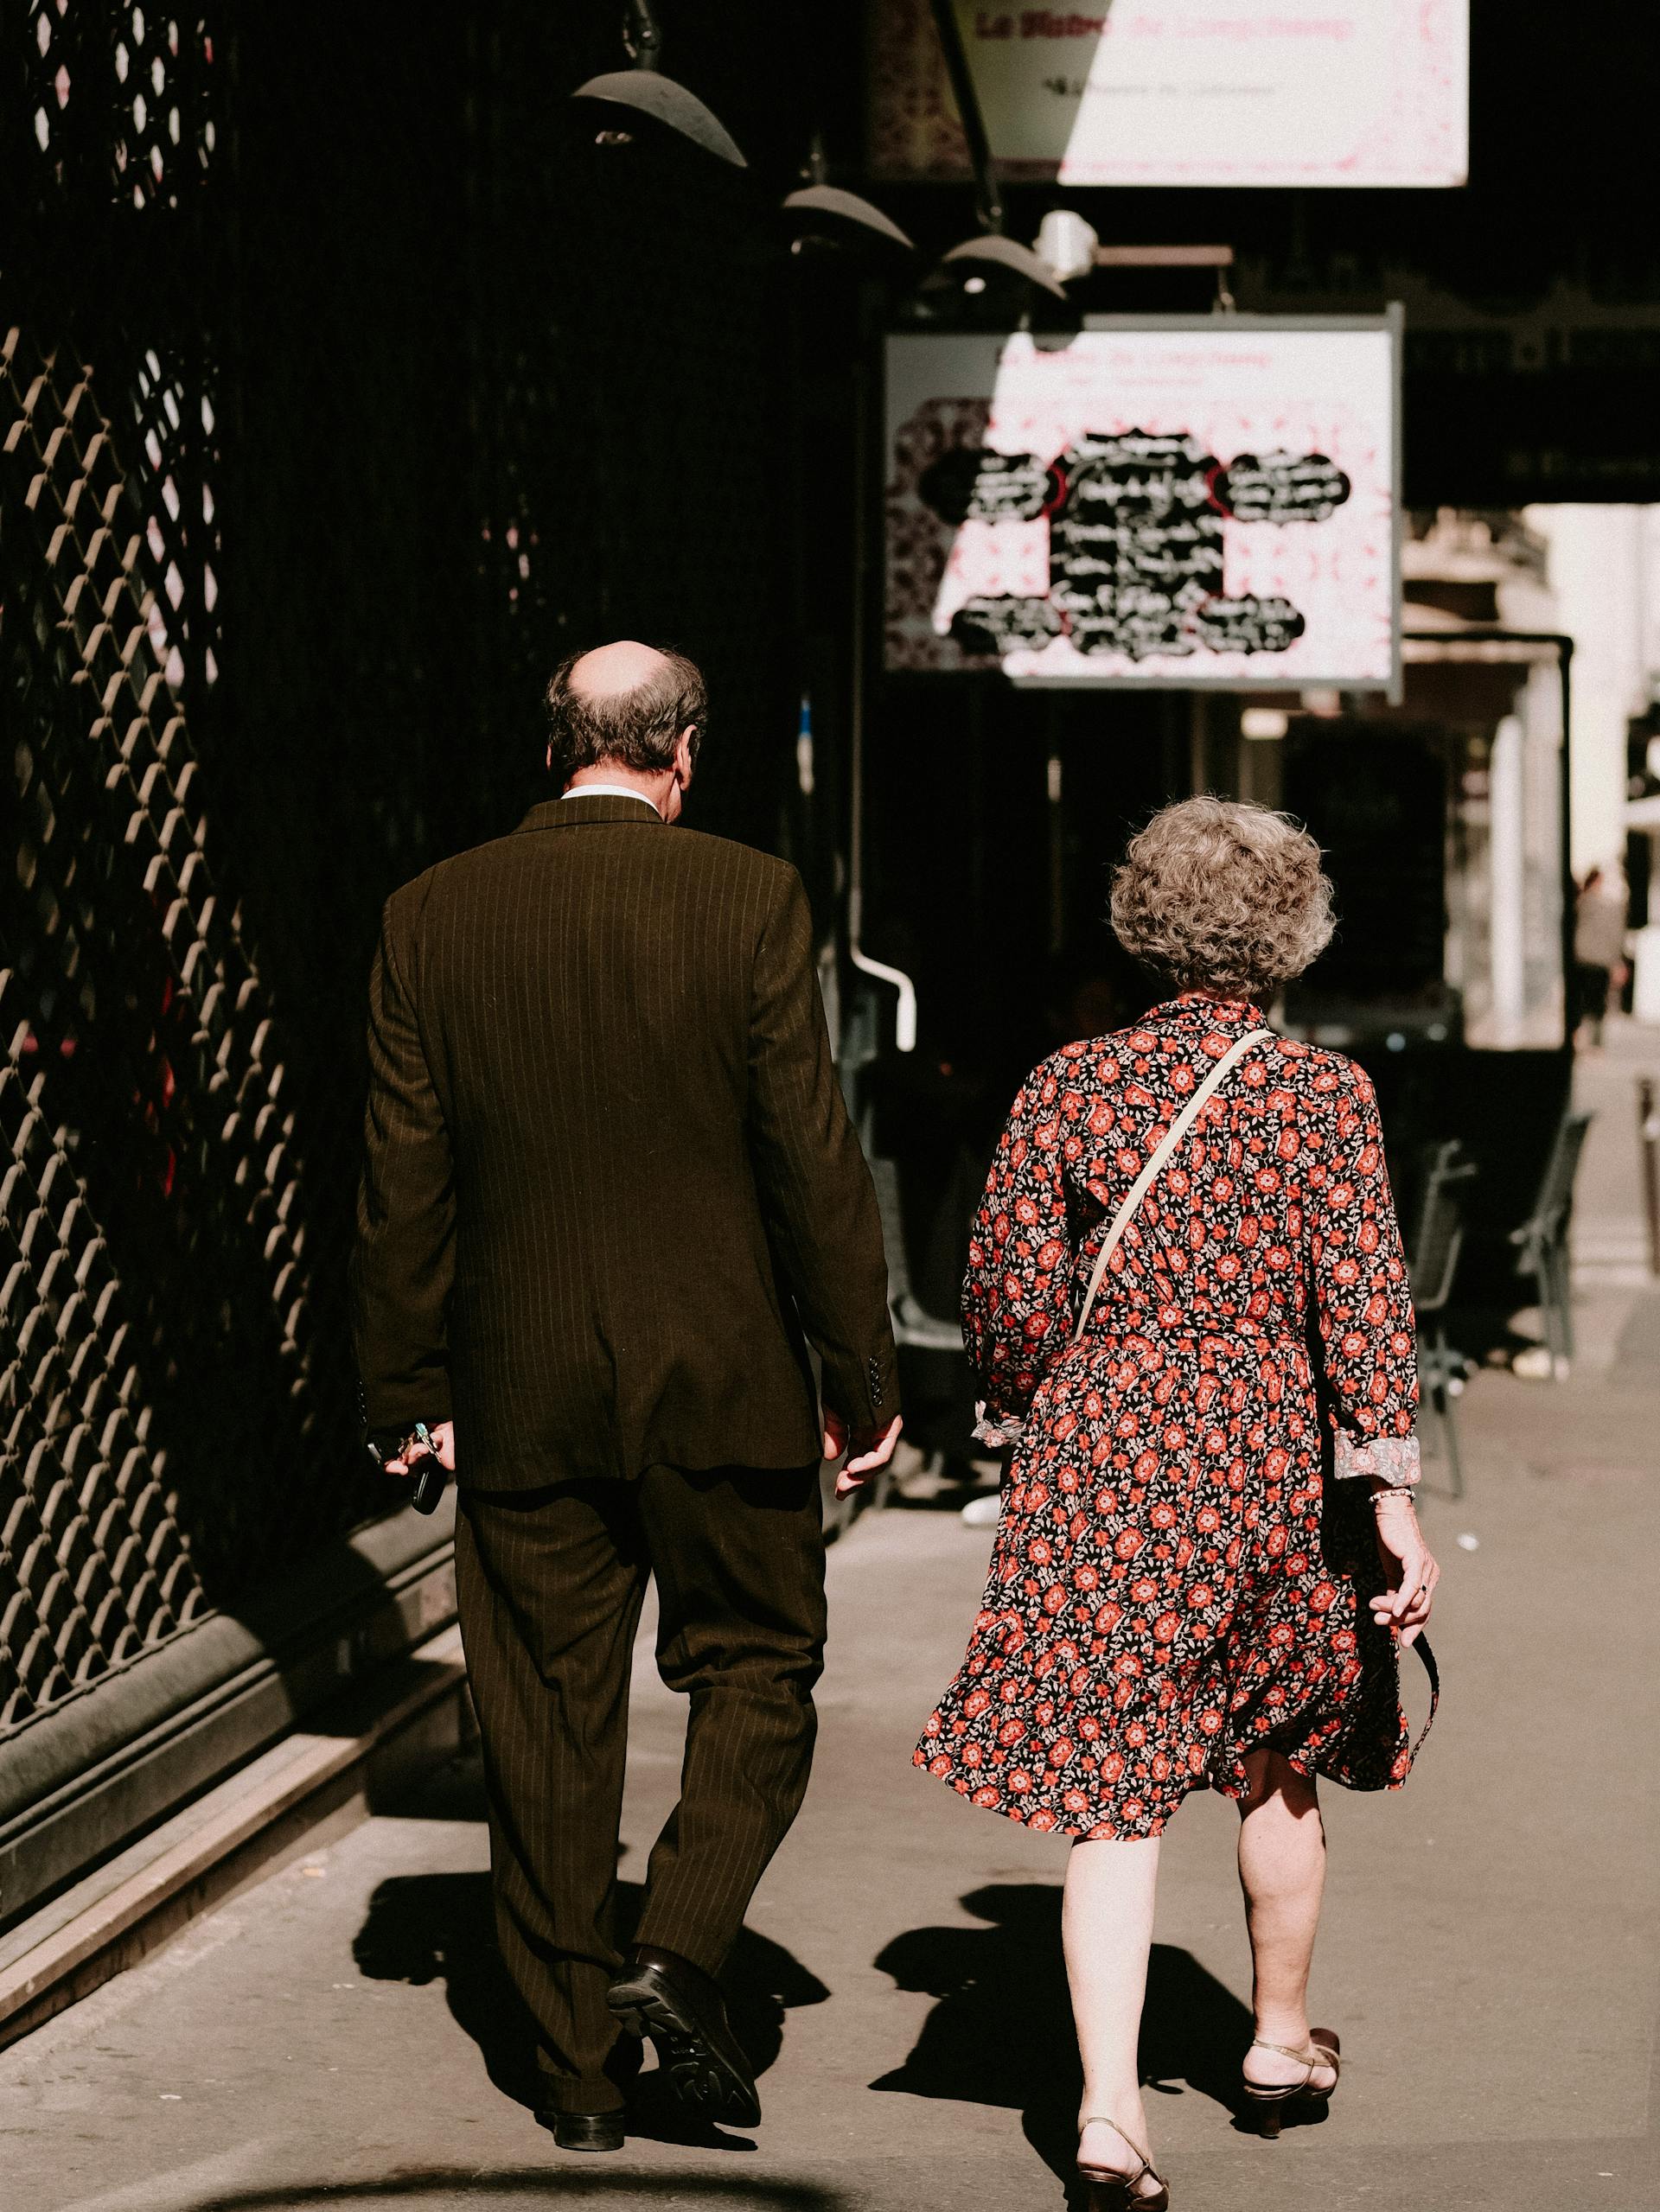 A mature couple walking together | Source: Pexels